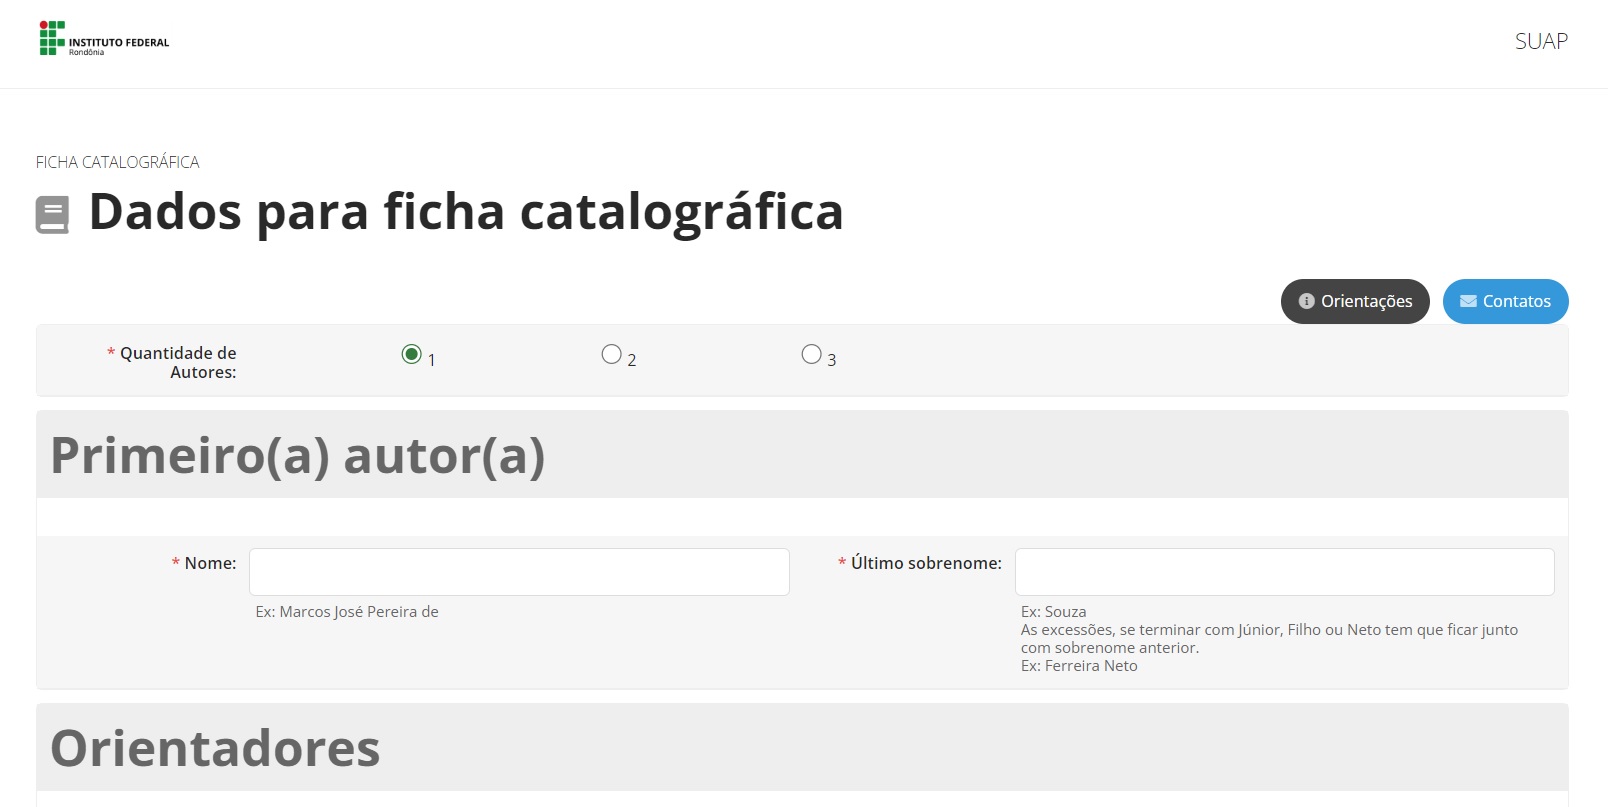 IFRO Ficha Catalográfica SUAP